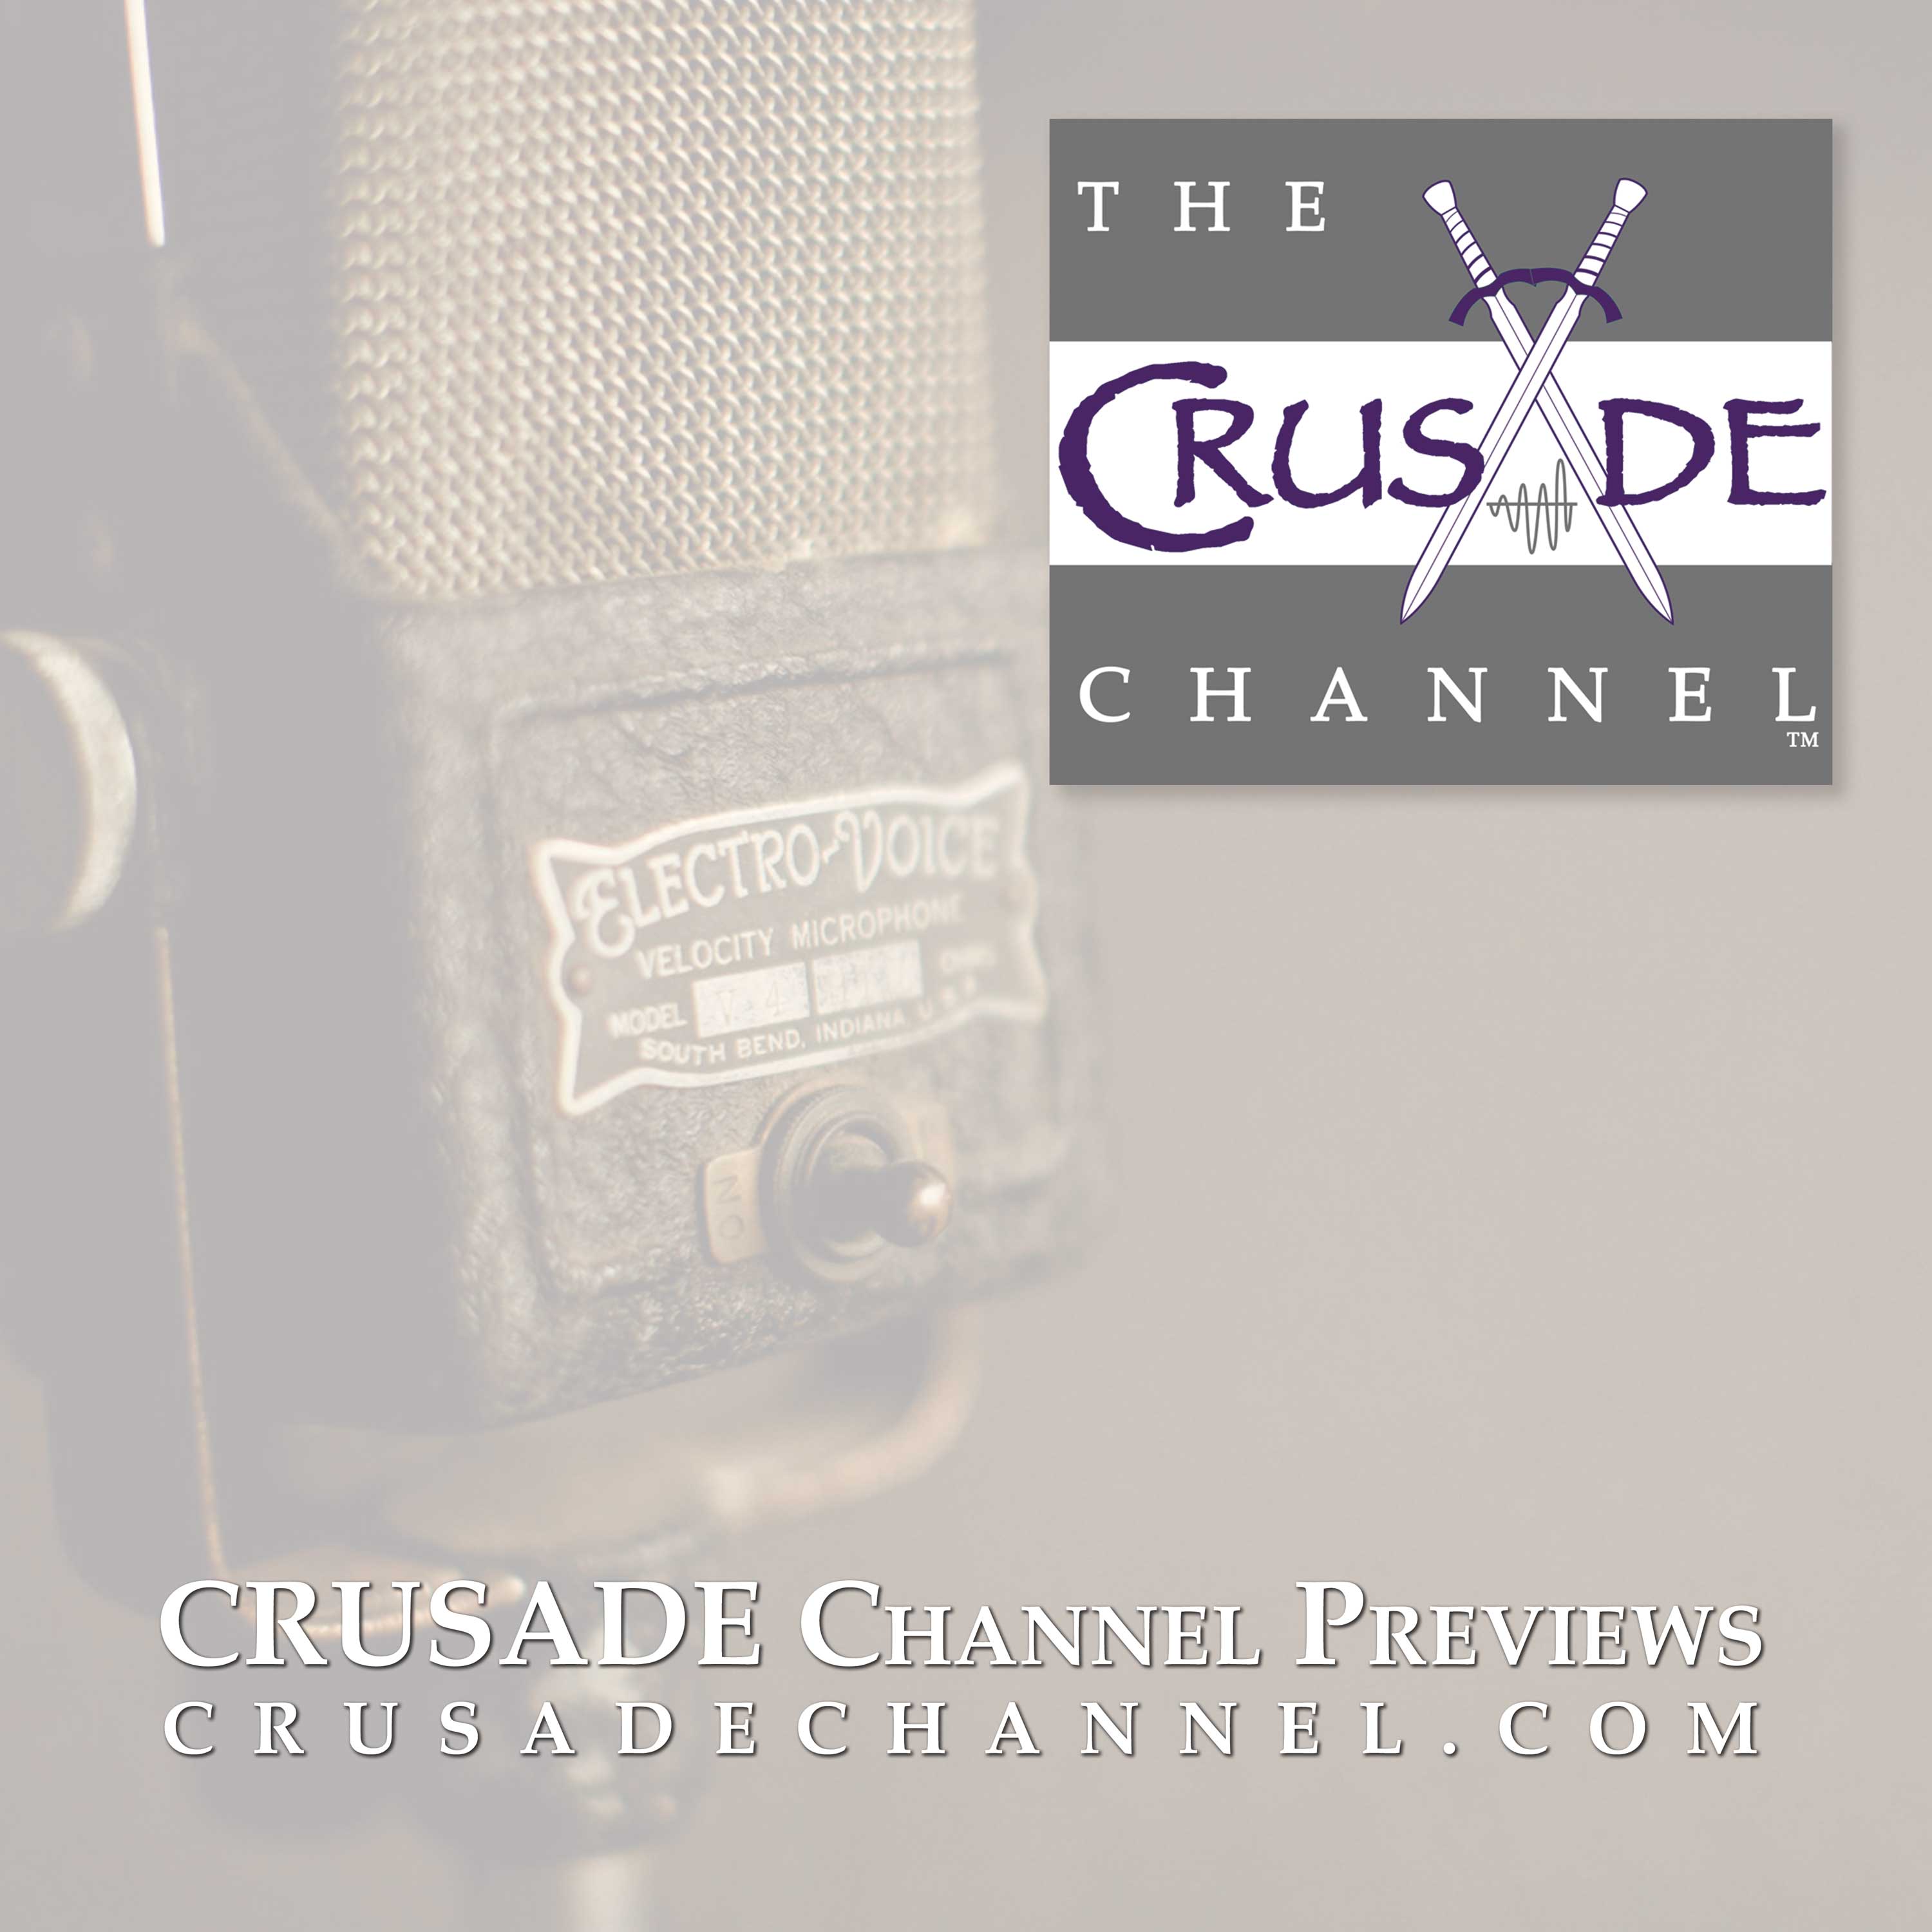 The Crusade Channel Previews